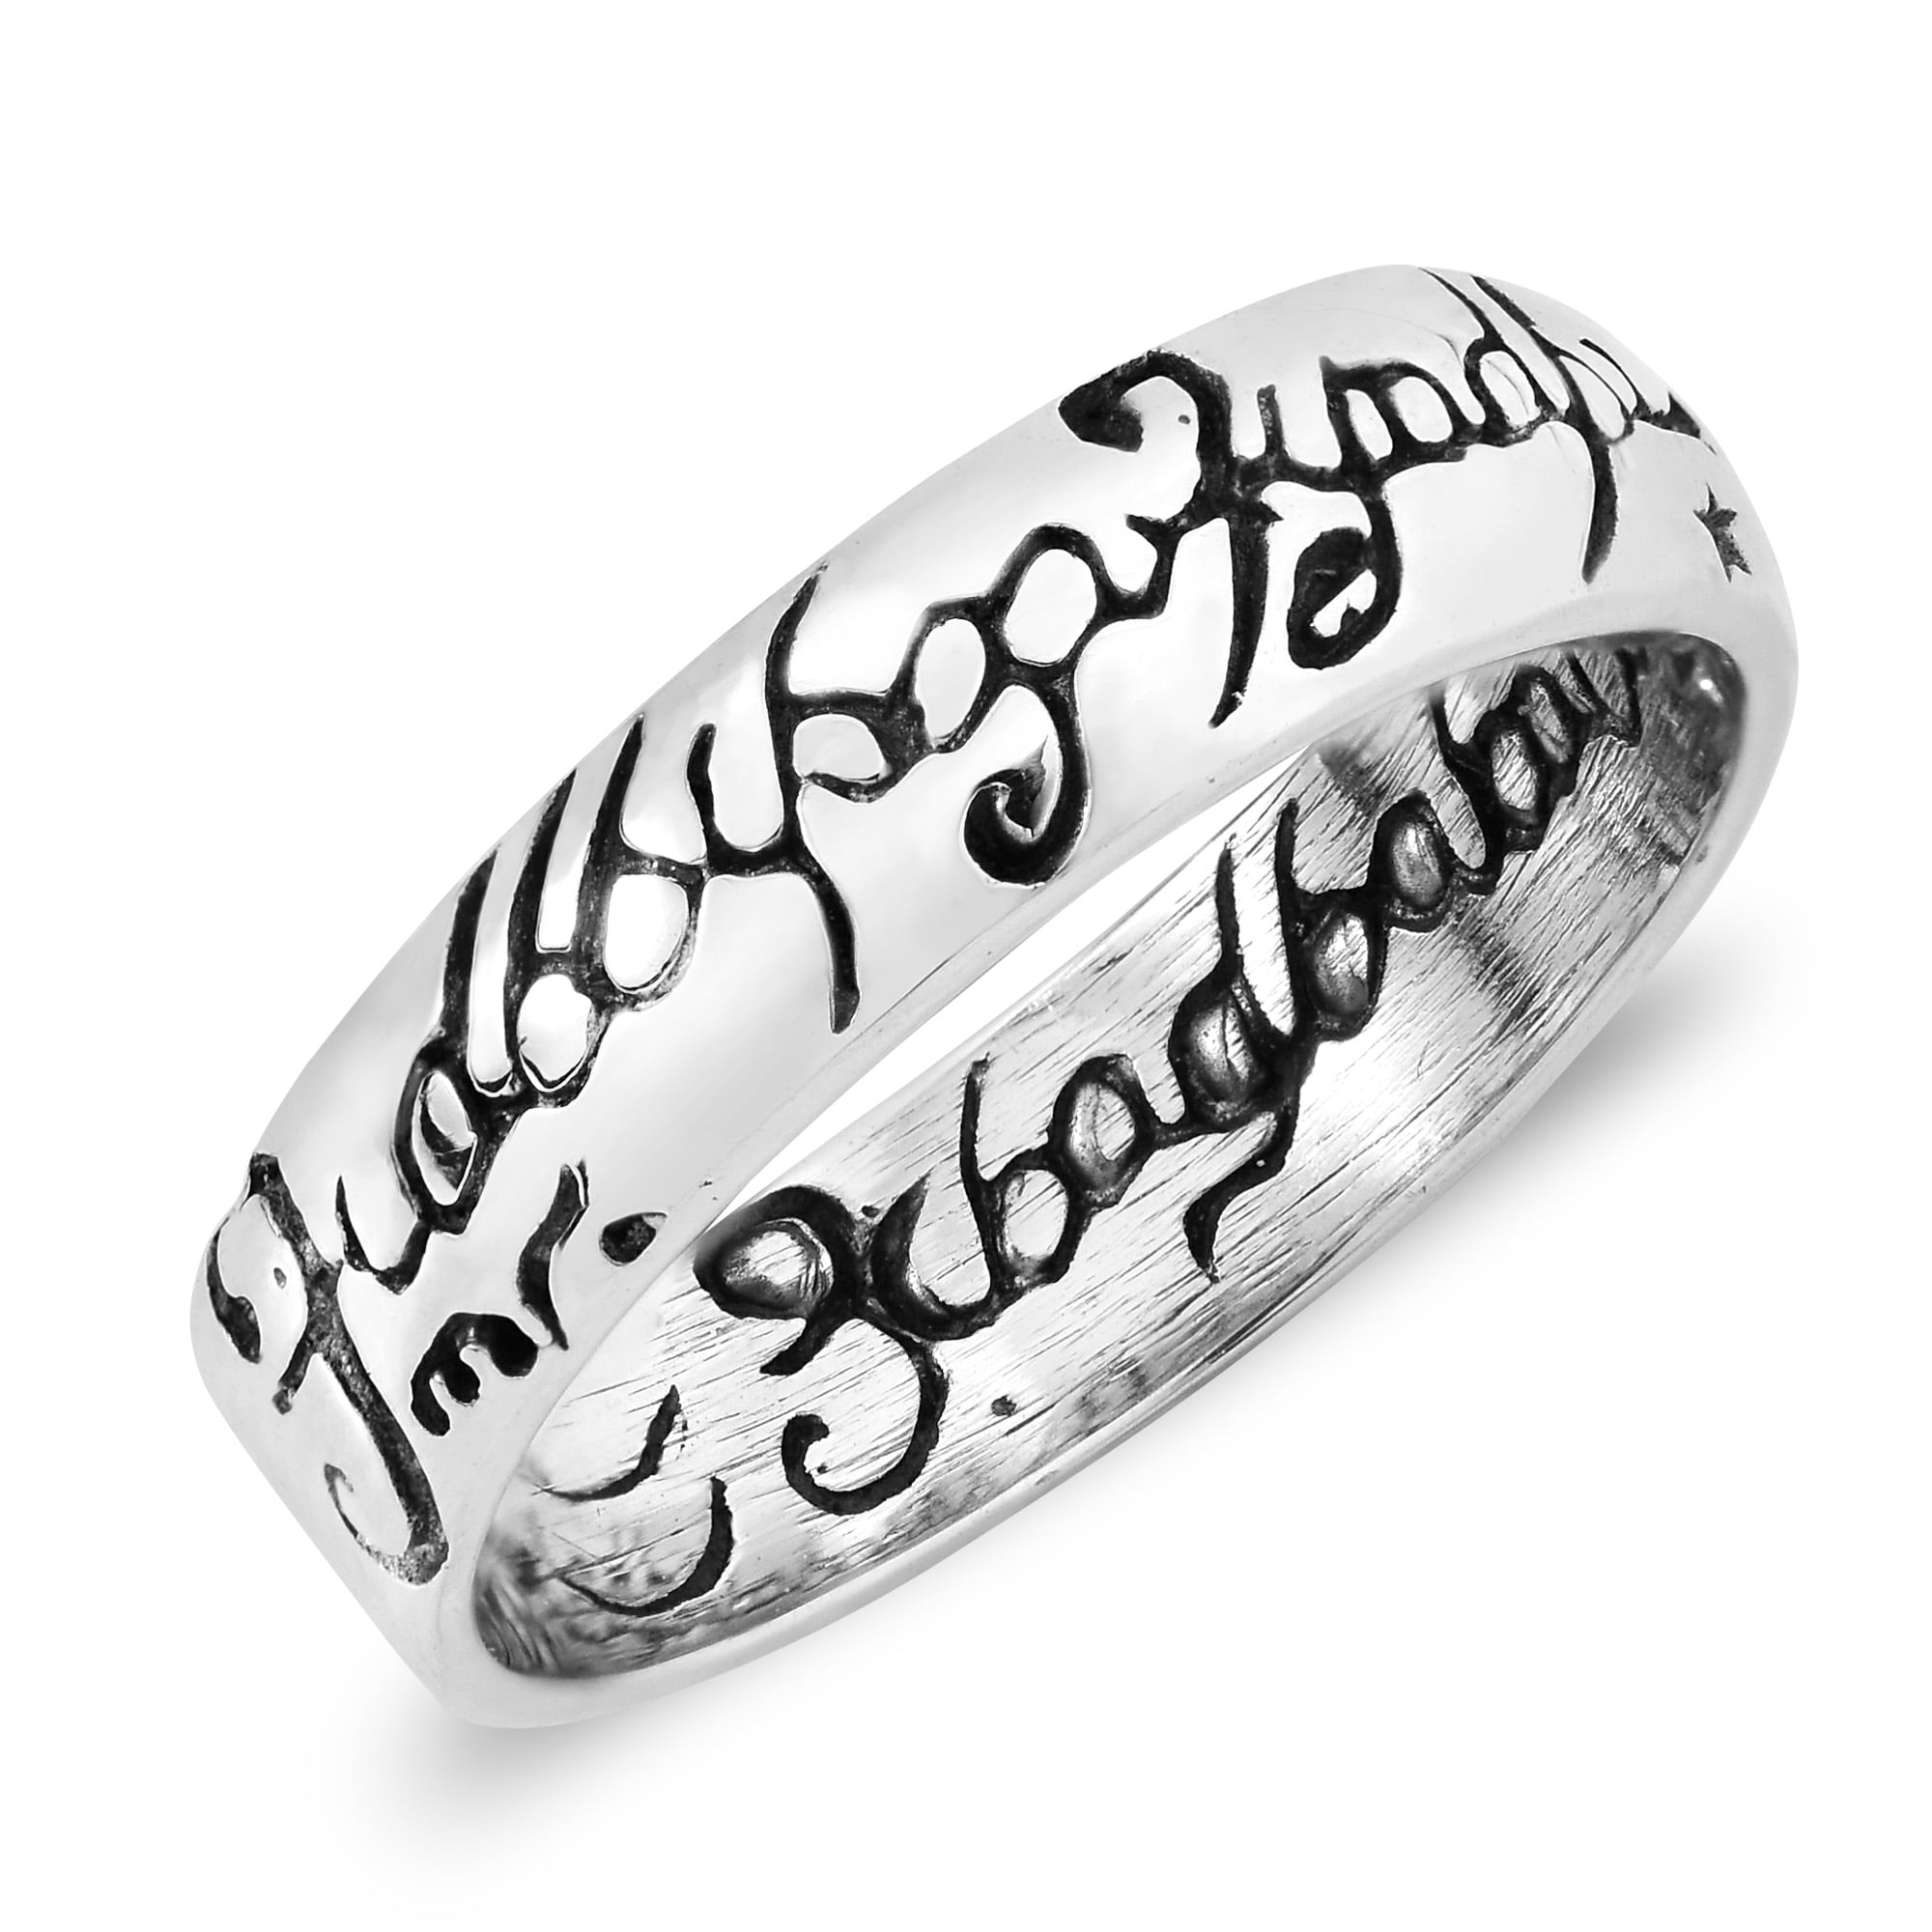 The Lord of The Rings: Silver Coloured Ring in Tungsten 8 mm :  Amazon.co.uk: Fashion